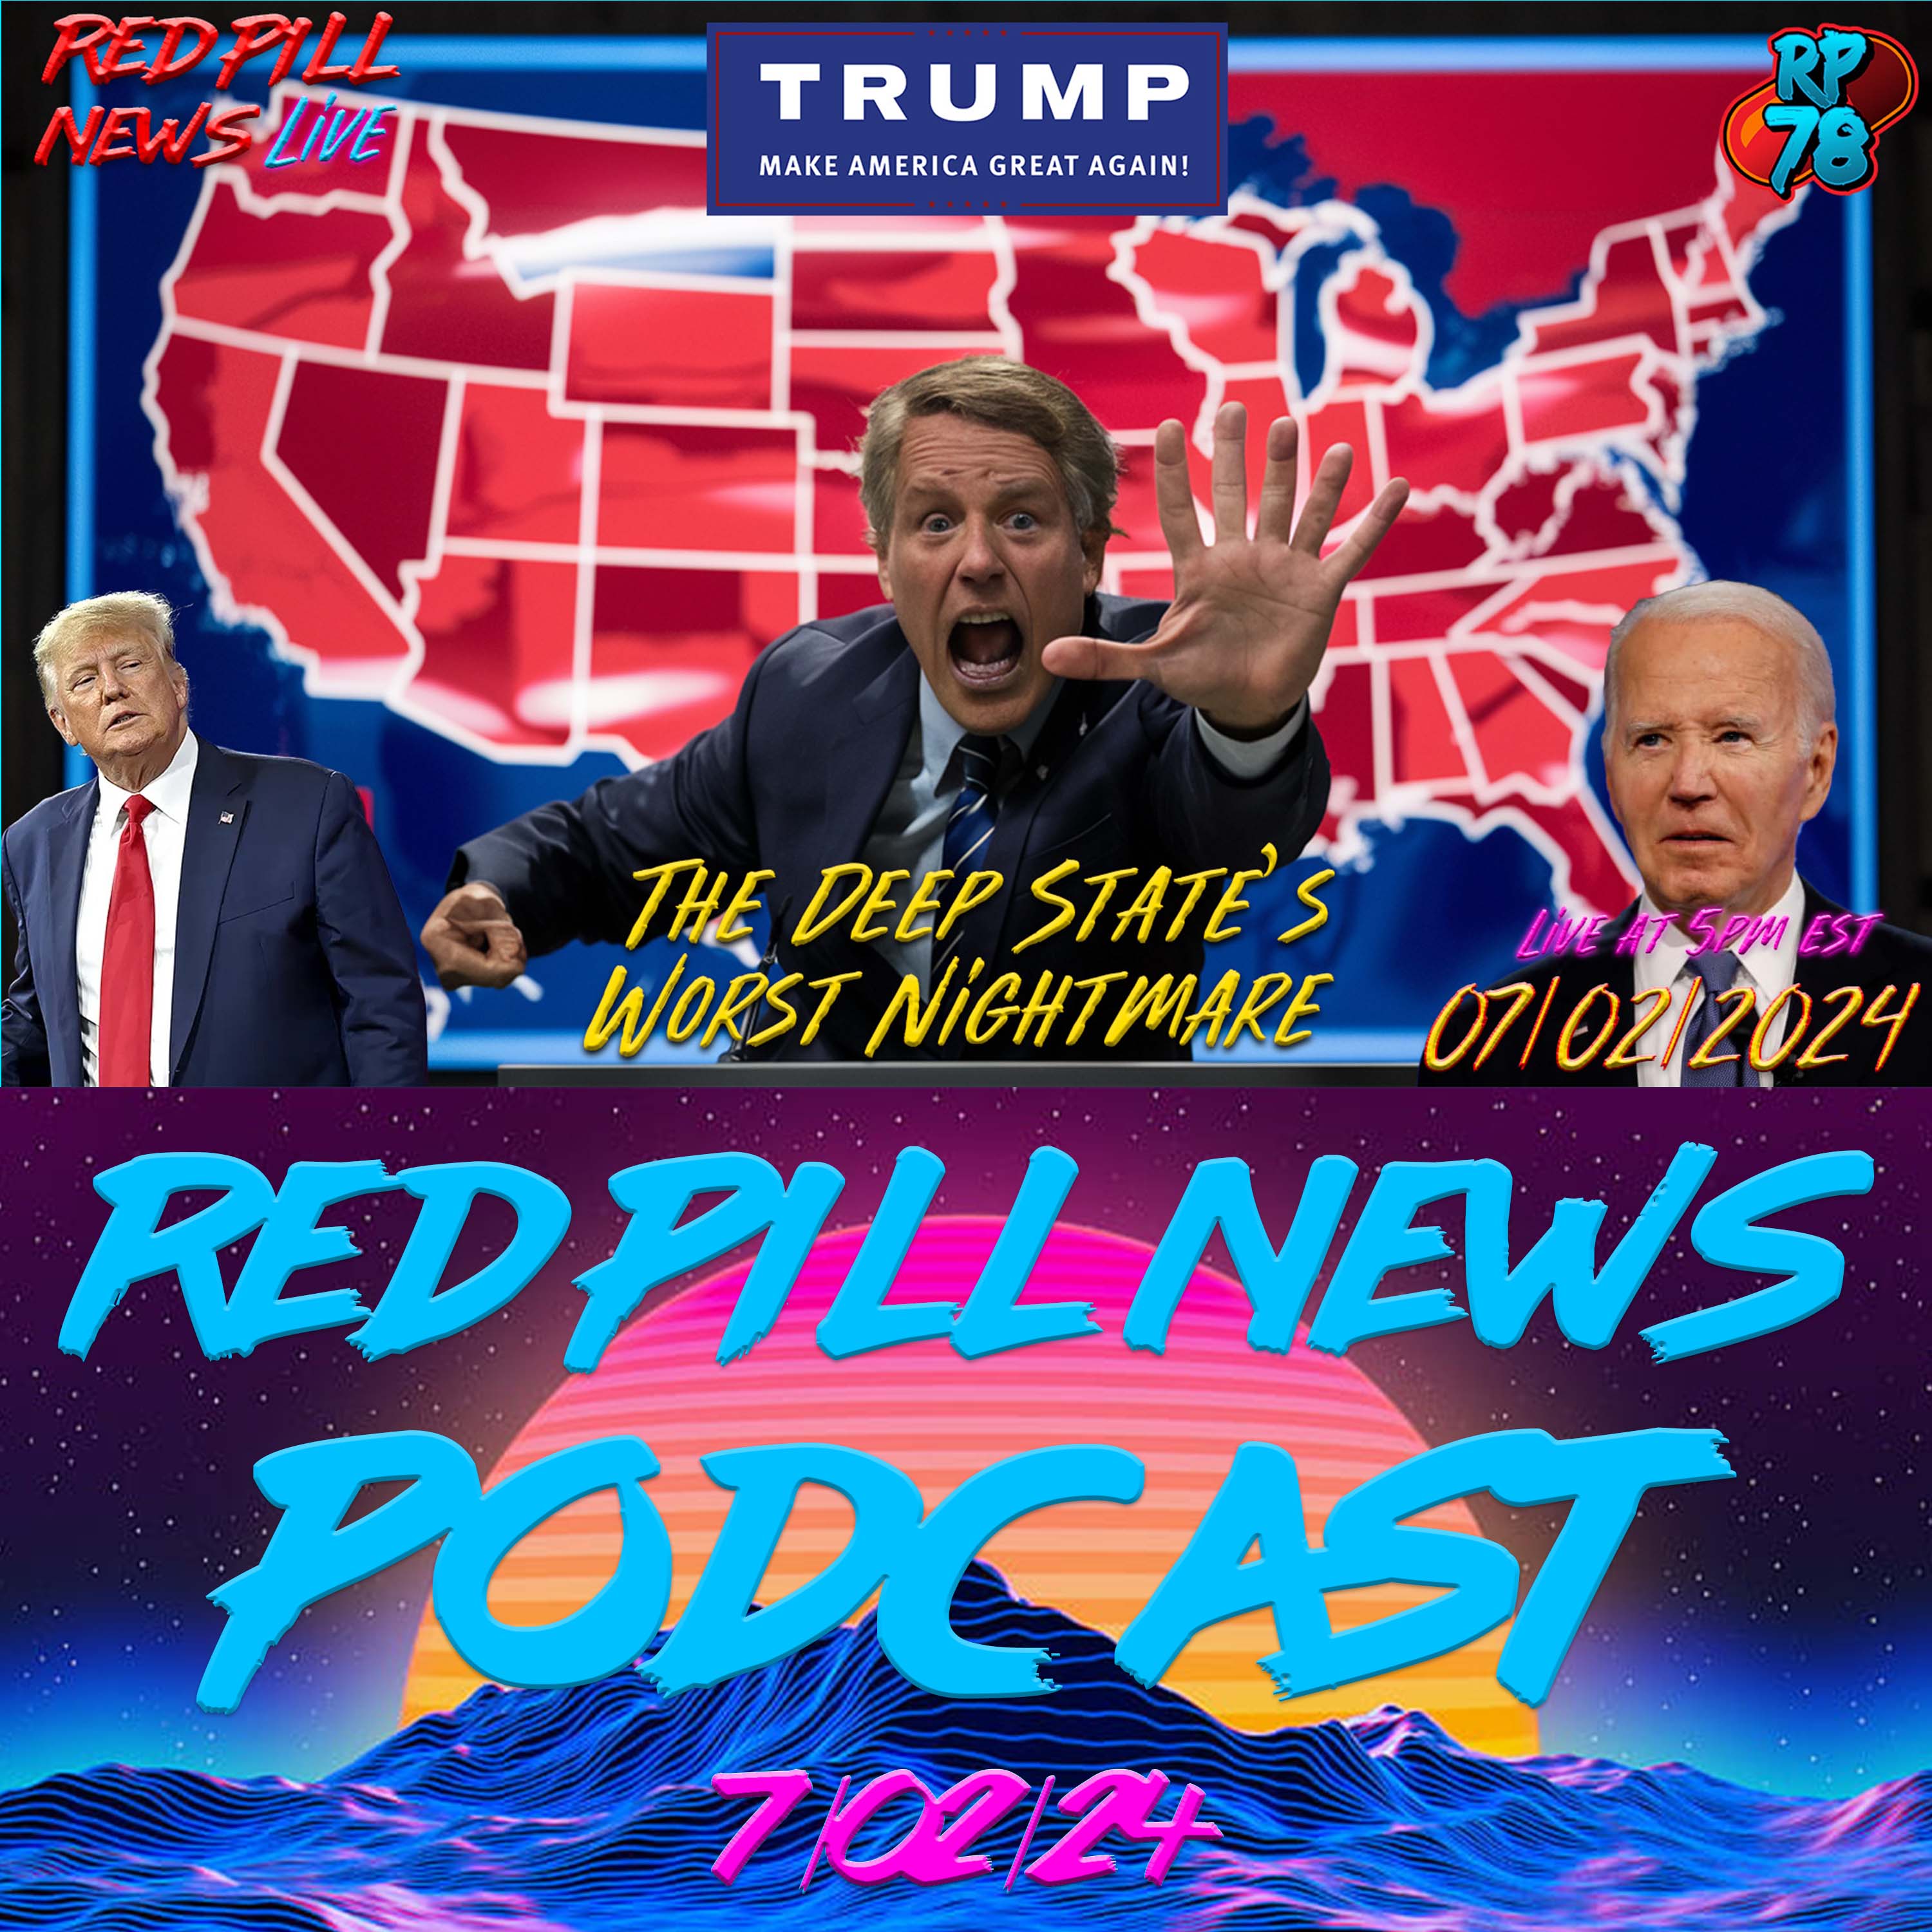 DNC CHAOS - Party Split, Trump Heading For Landslide on  Red Pill News Live